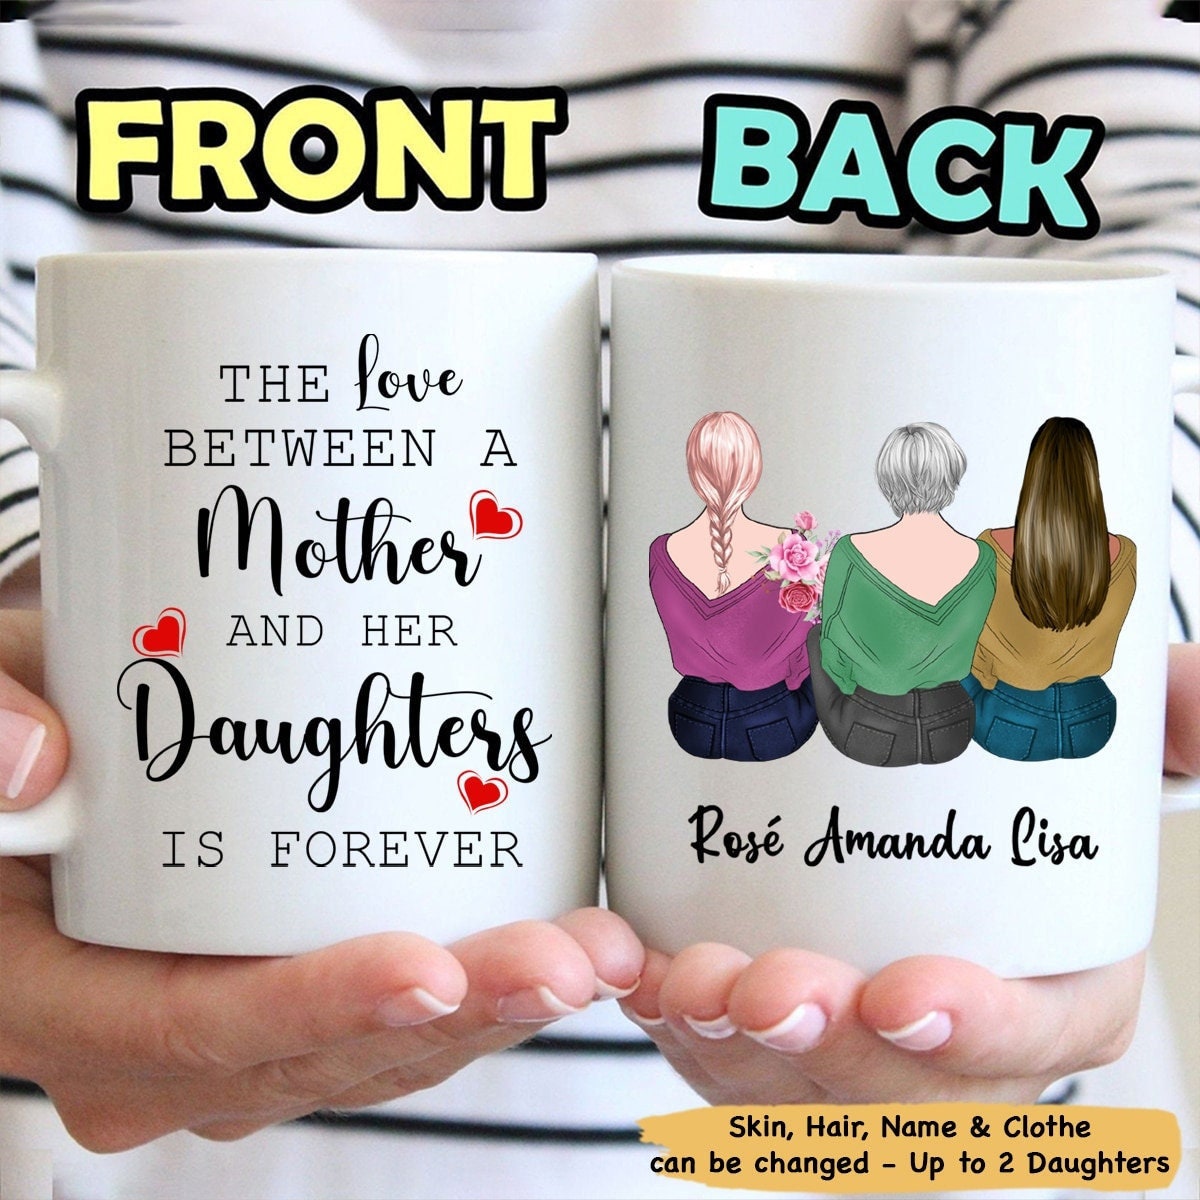 Mother & Daughters Forever Linked Together Mug - Personalized